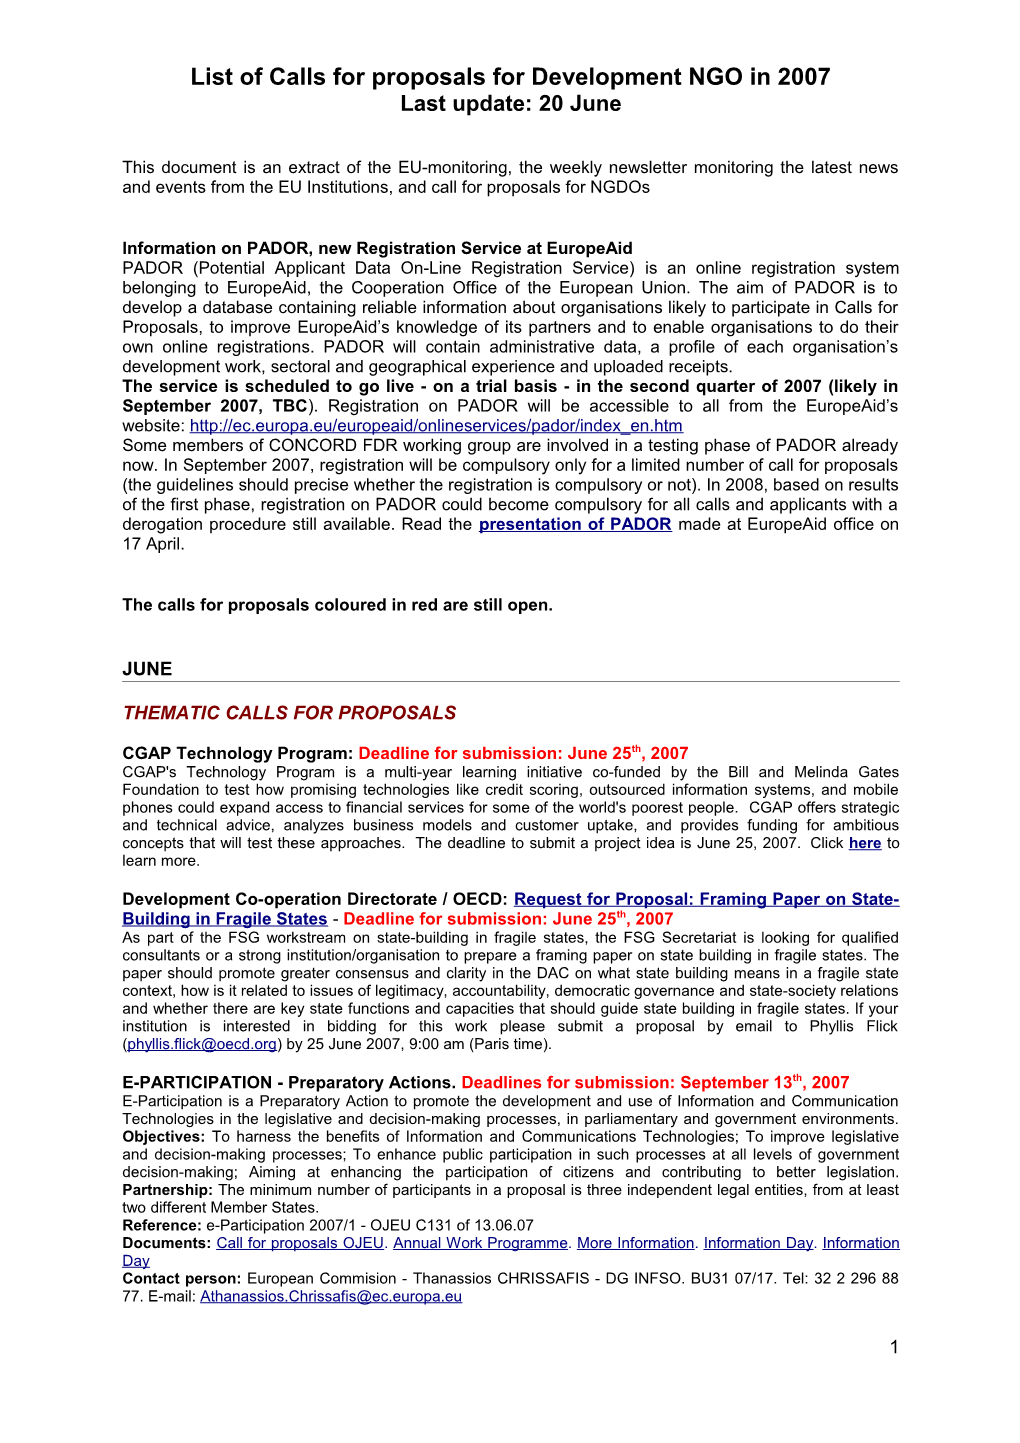 List of Calls for Proposals for Development NGO in 2007